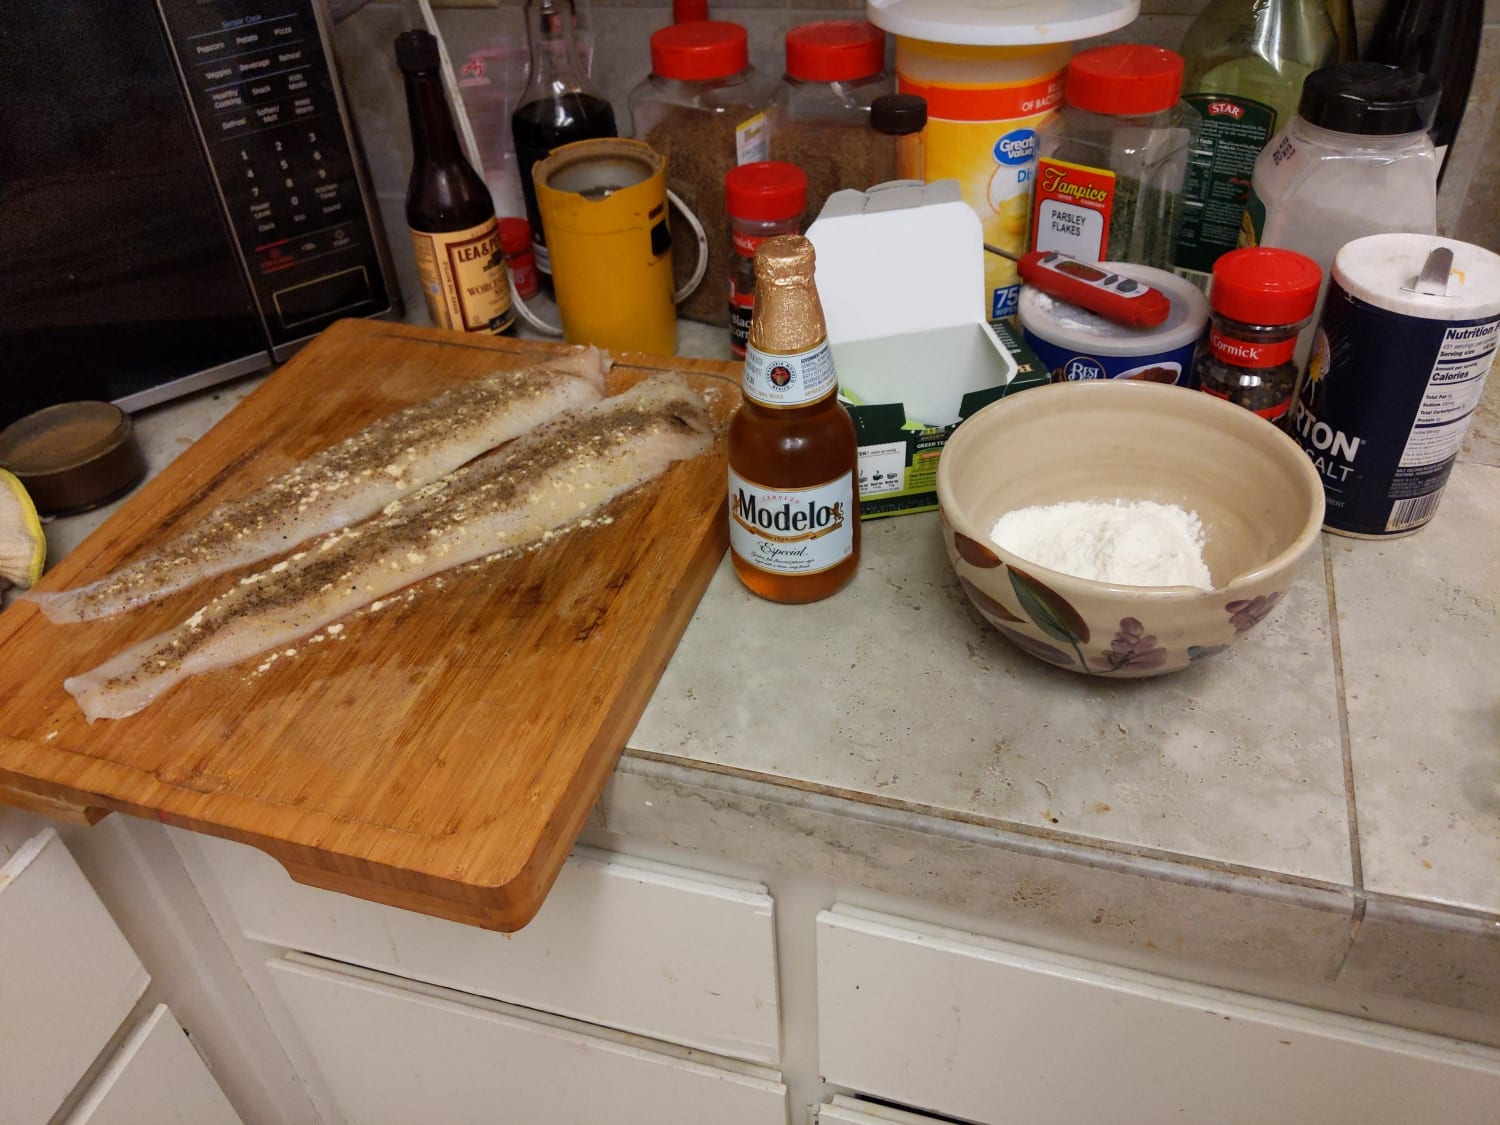 Was gonna make cookies but found modelo and fish to fry